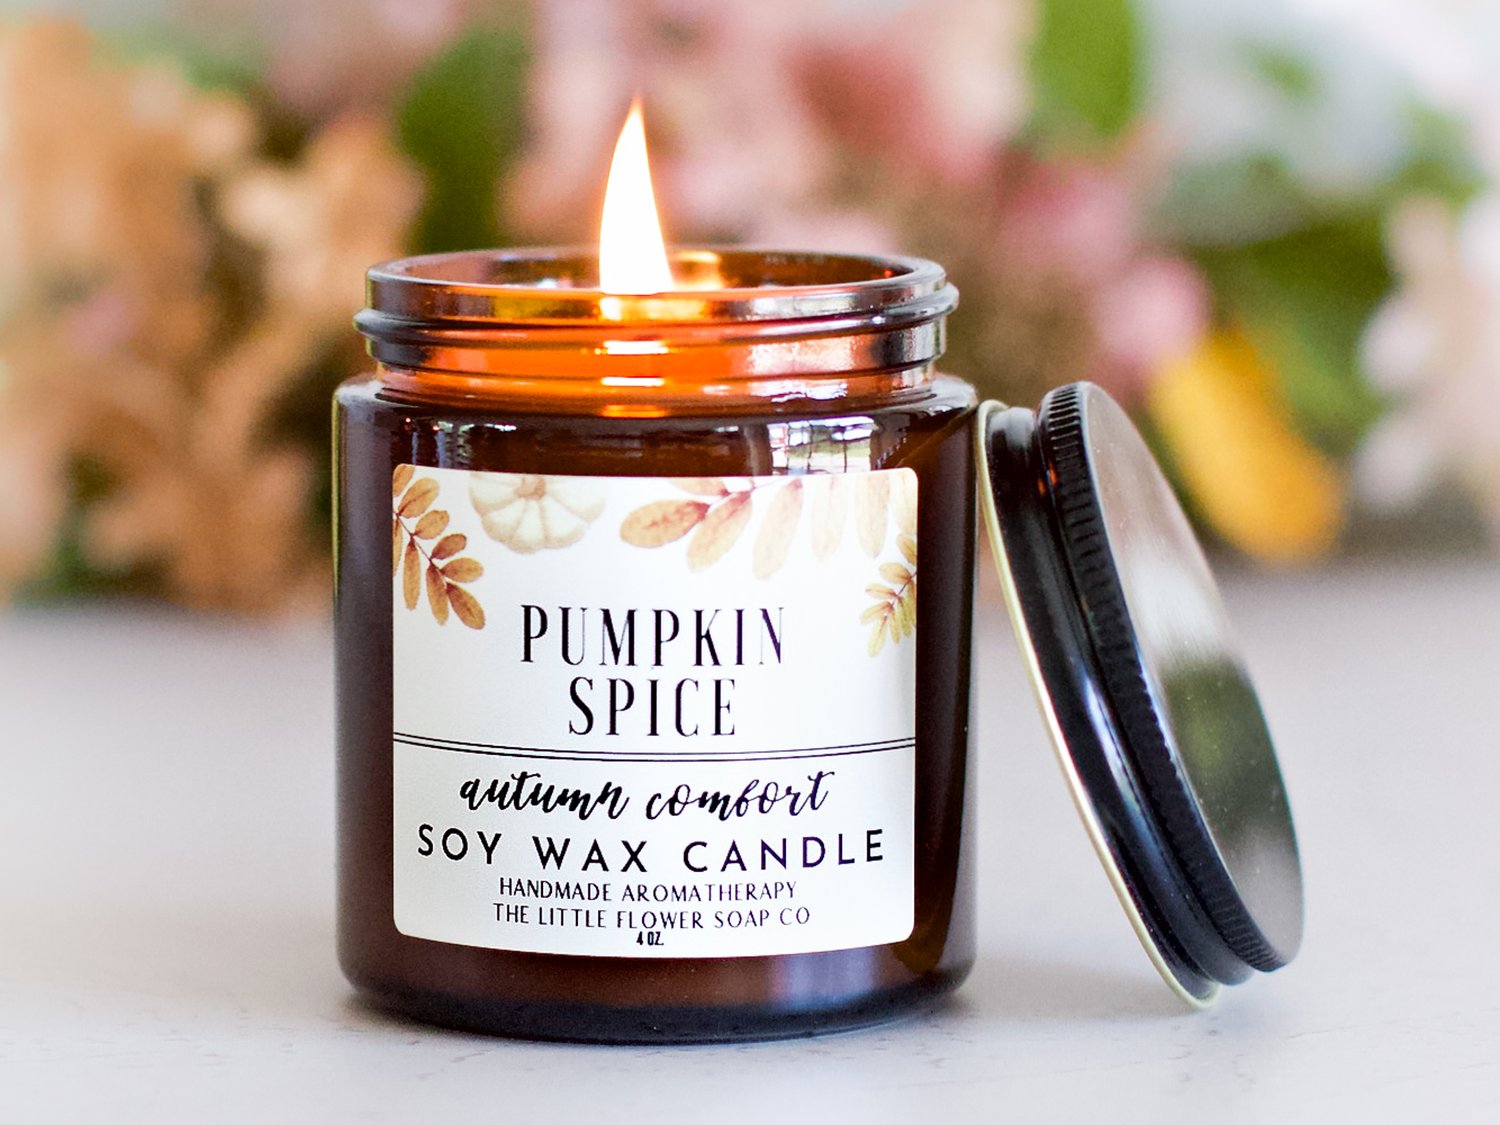 Pumpkin Spice Scented Holiday Candle, Soy Wax Candles for The Home Scented  with Phthalate Free Oils, 3.5 x 3 inch, 8.8 oz, 37 Hour Burn Time Fall